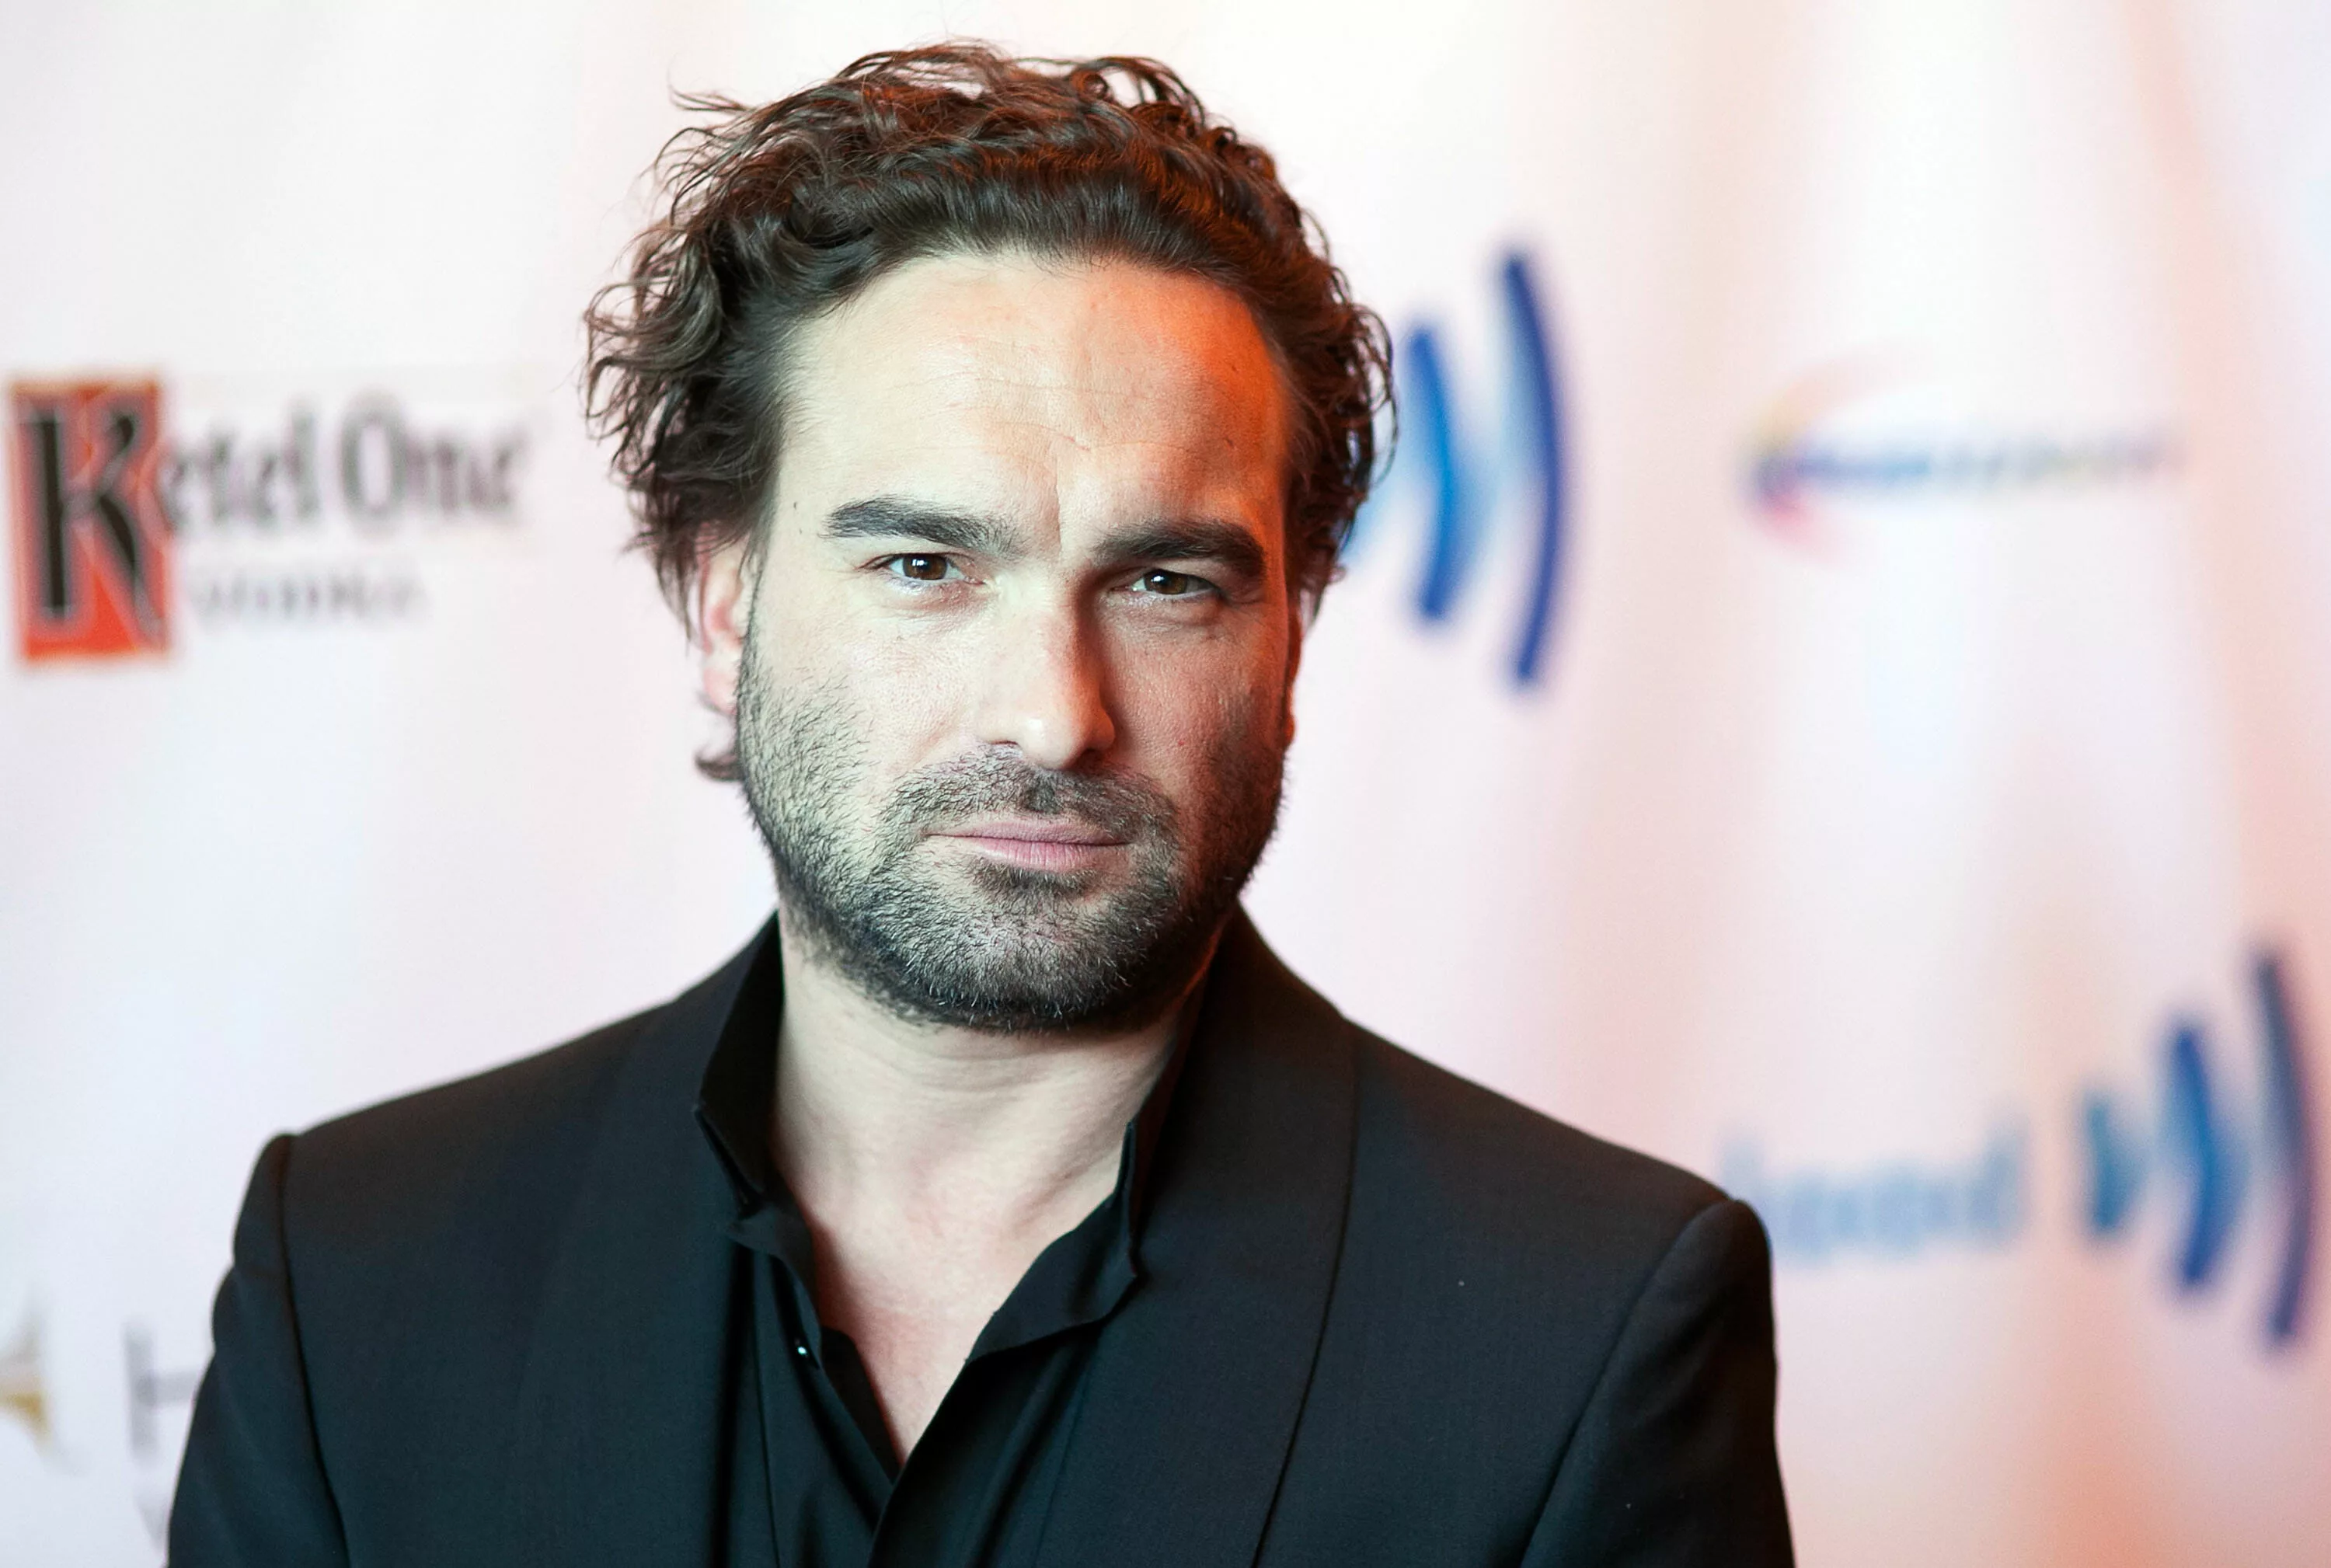 Big Bang Theory Star Johnny Galecki Nudes EXPOSED! â€¢ Leaked Meat